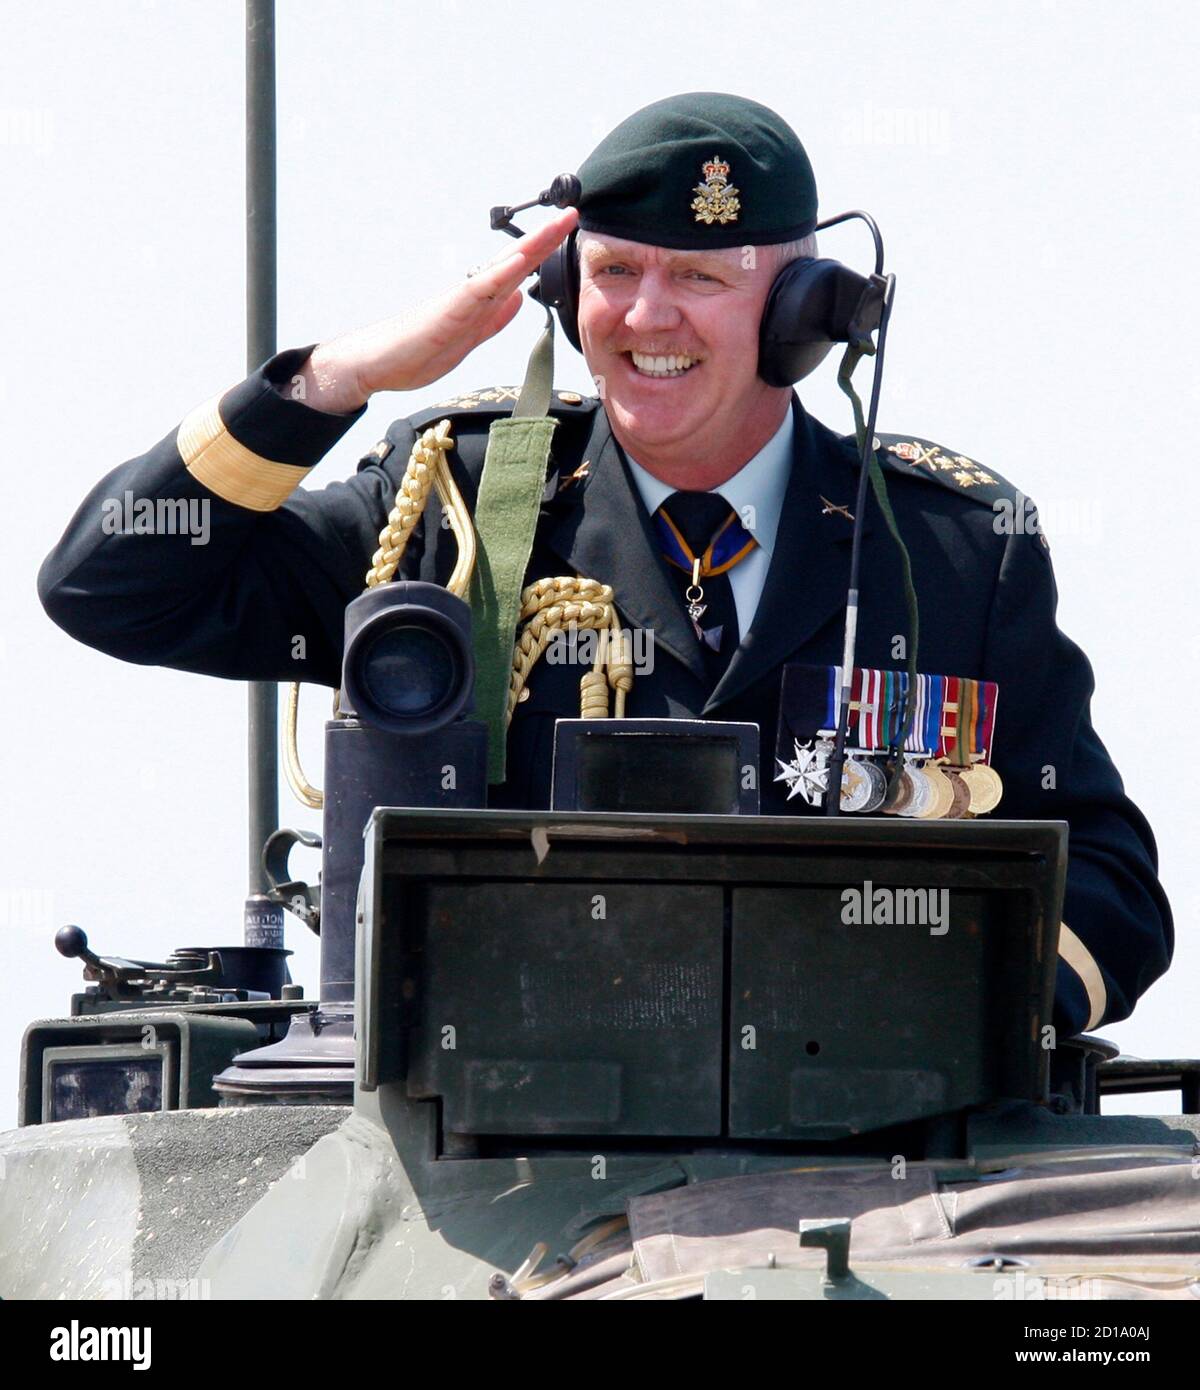 Former Chief of Defence Staff General Rick Hillier salutes from a tank during a change of command ceremony in Ottawa July 2, 2008.       REUTERS/Chris Wattie       (CANADA) Stock Photo